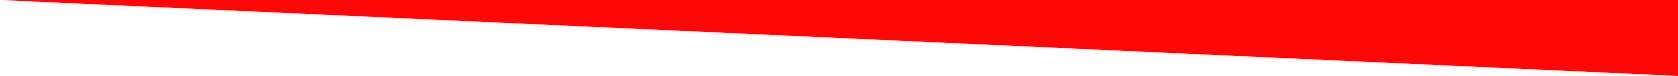 border top red.png